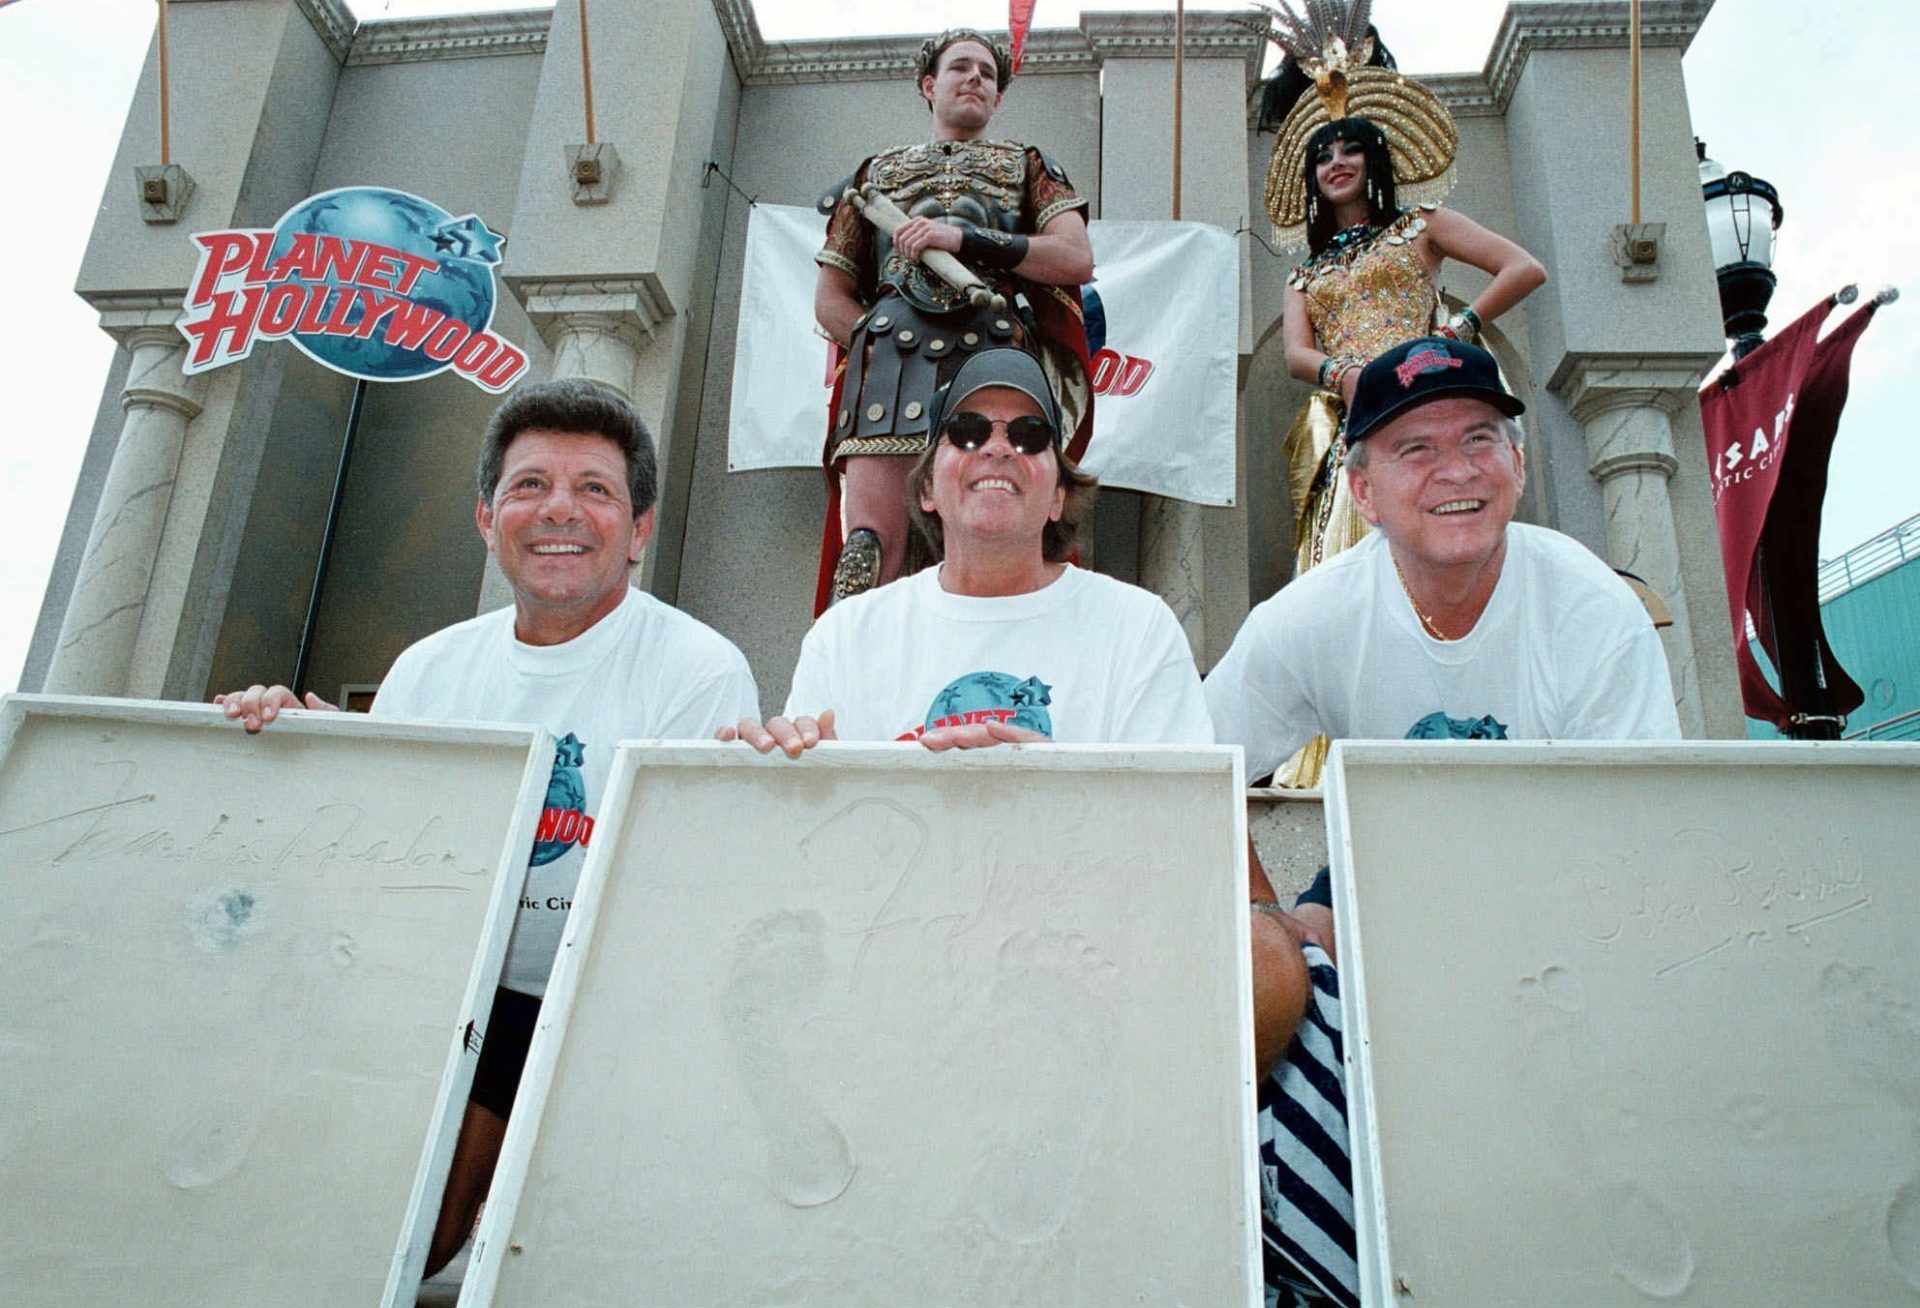 Former teen idols from the 50's and 60's Frankie Avalon, left, Fabian, center, and Bobby Rydell, right, show off their foot prints in plaster casts Friday, July 3, 1998, on the Boardwalk in Atlantic City, N.J.